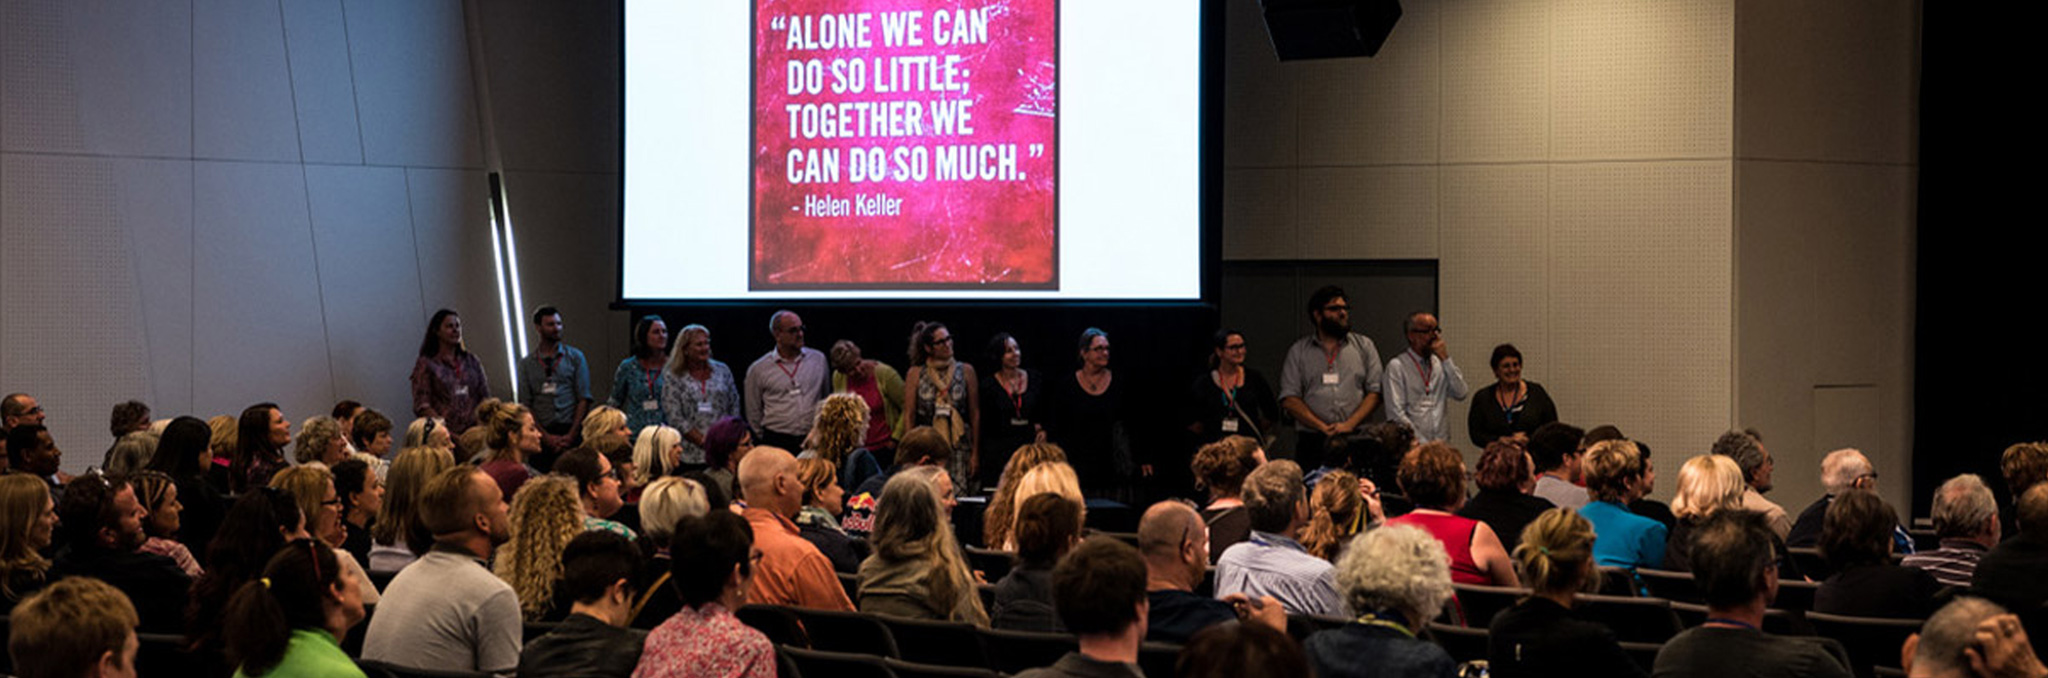 cru board and staff standing in line at the front of a conference under a slide that reads 'alone we can do so little, together we can do so much' by Helen Keller